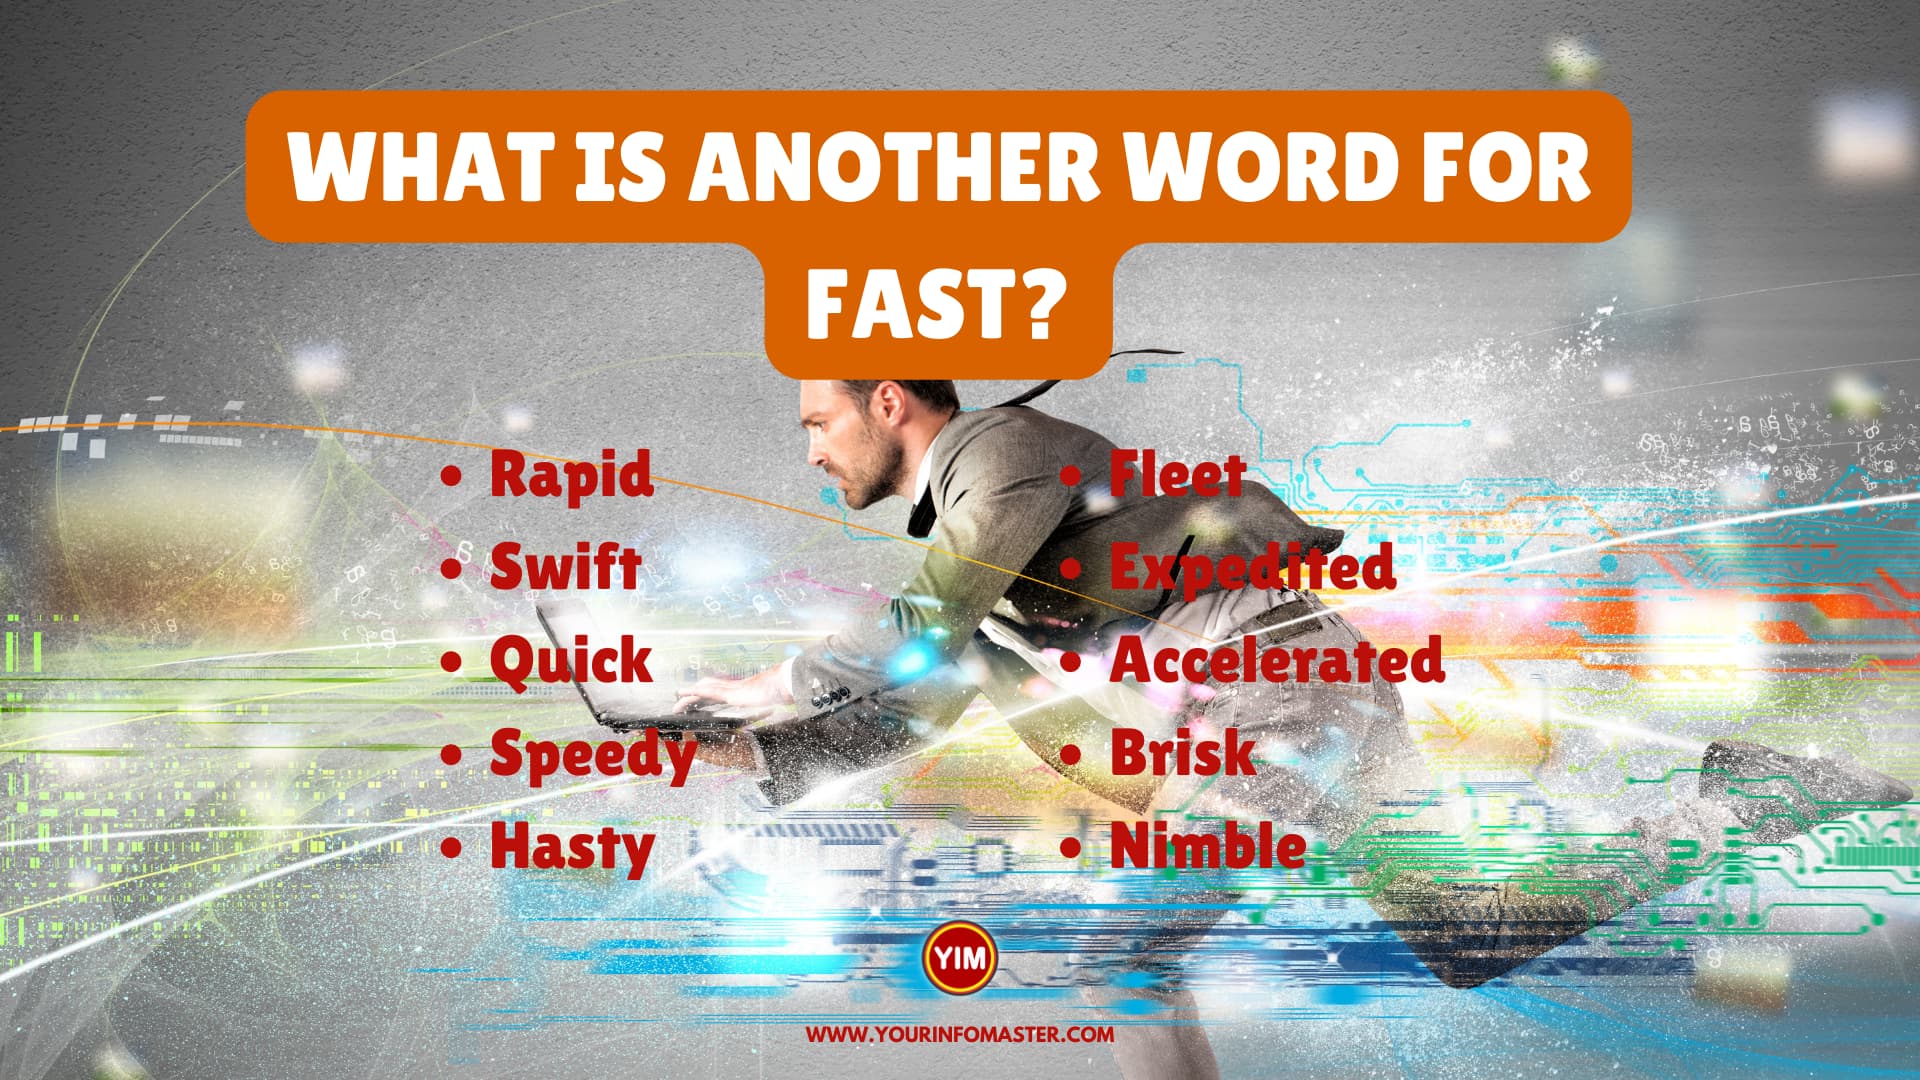 What is another word for Fast